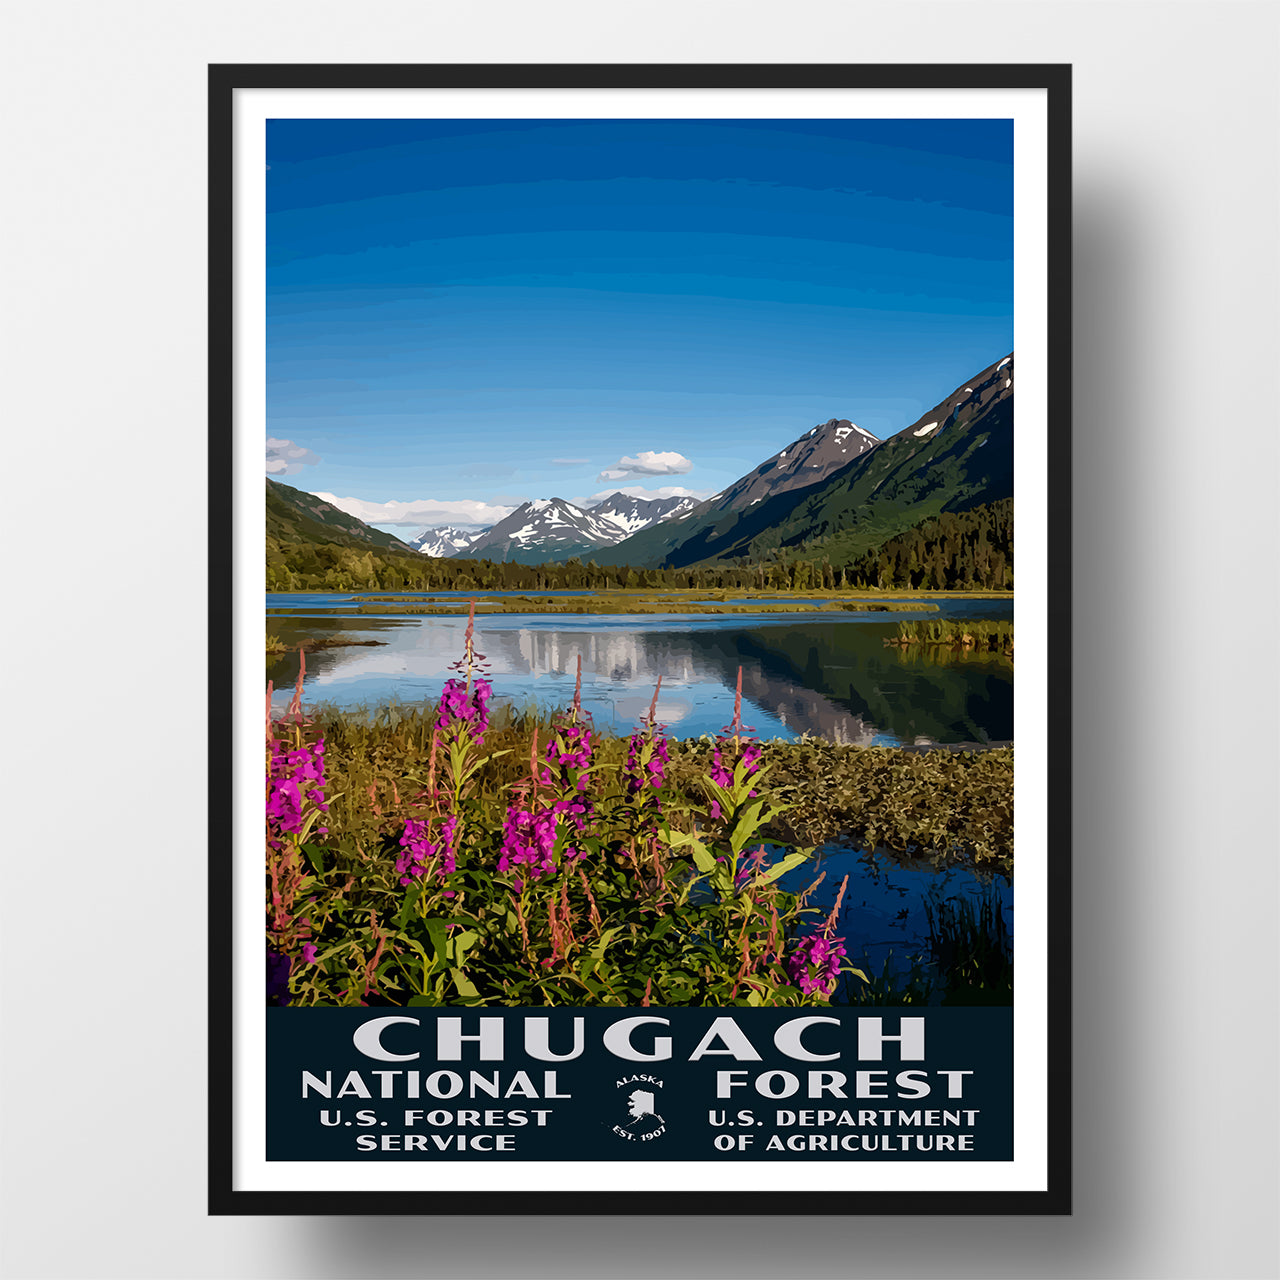 Chucach National Forest Poster